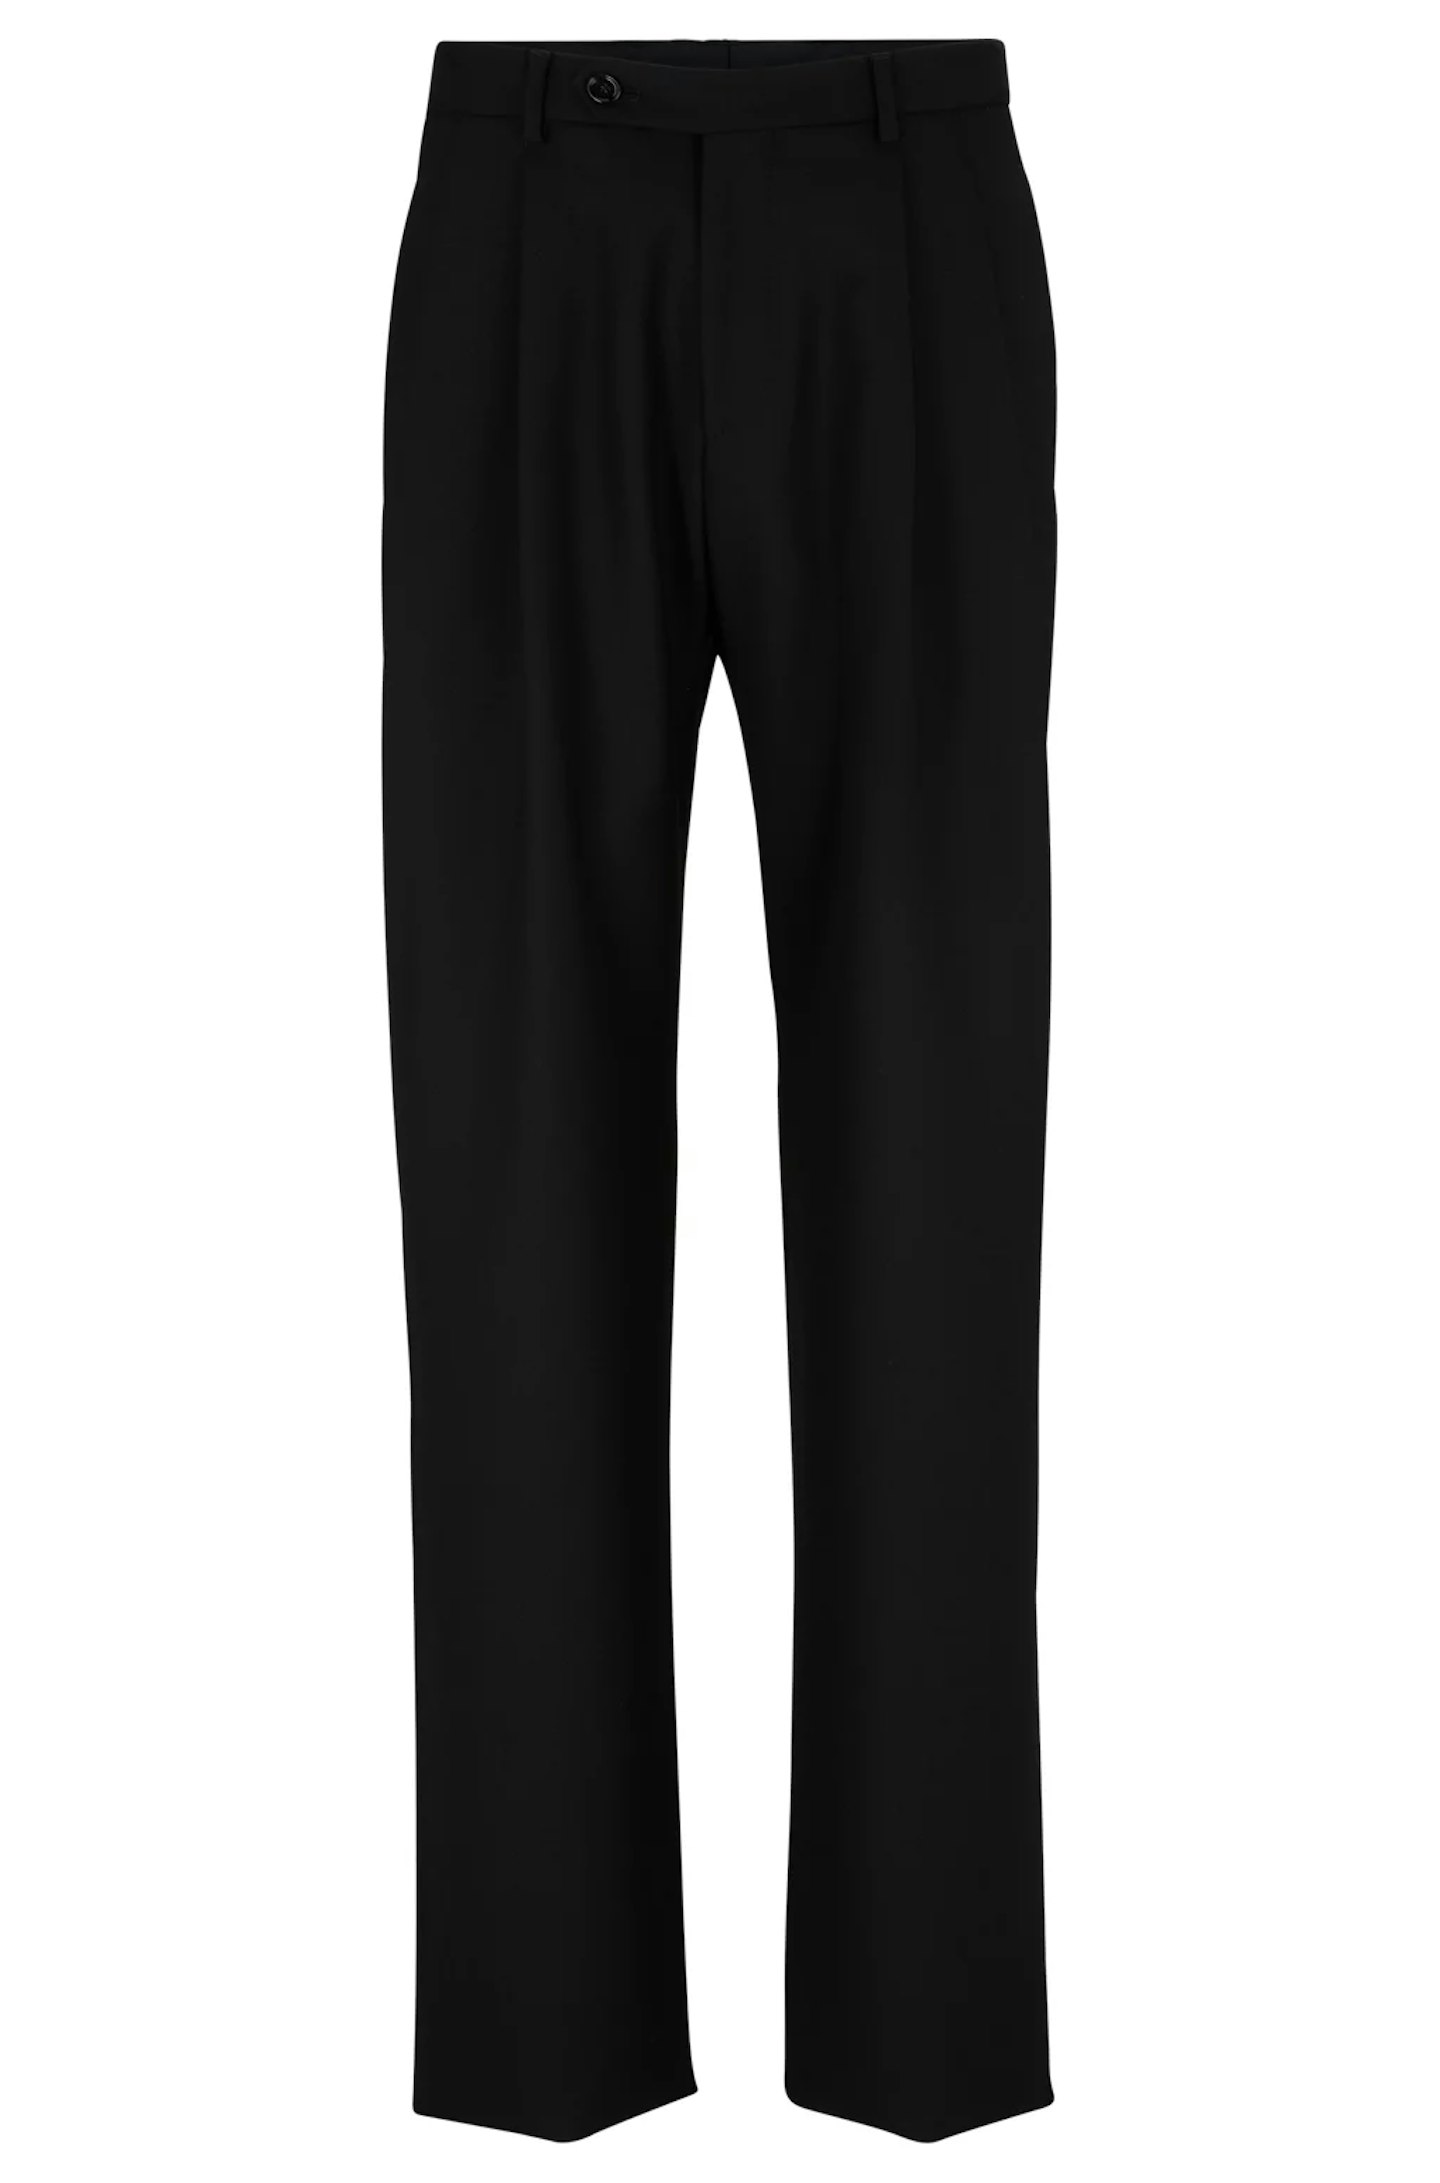 Gender- Neutral Tailored Trousers In Stretch Cloth, £239 at BOSS